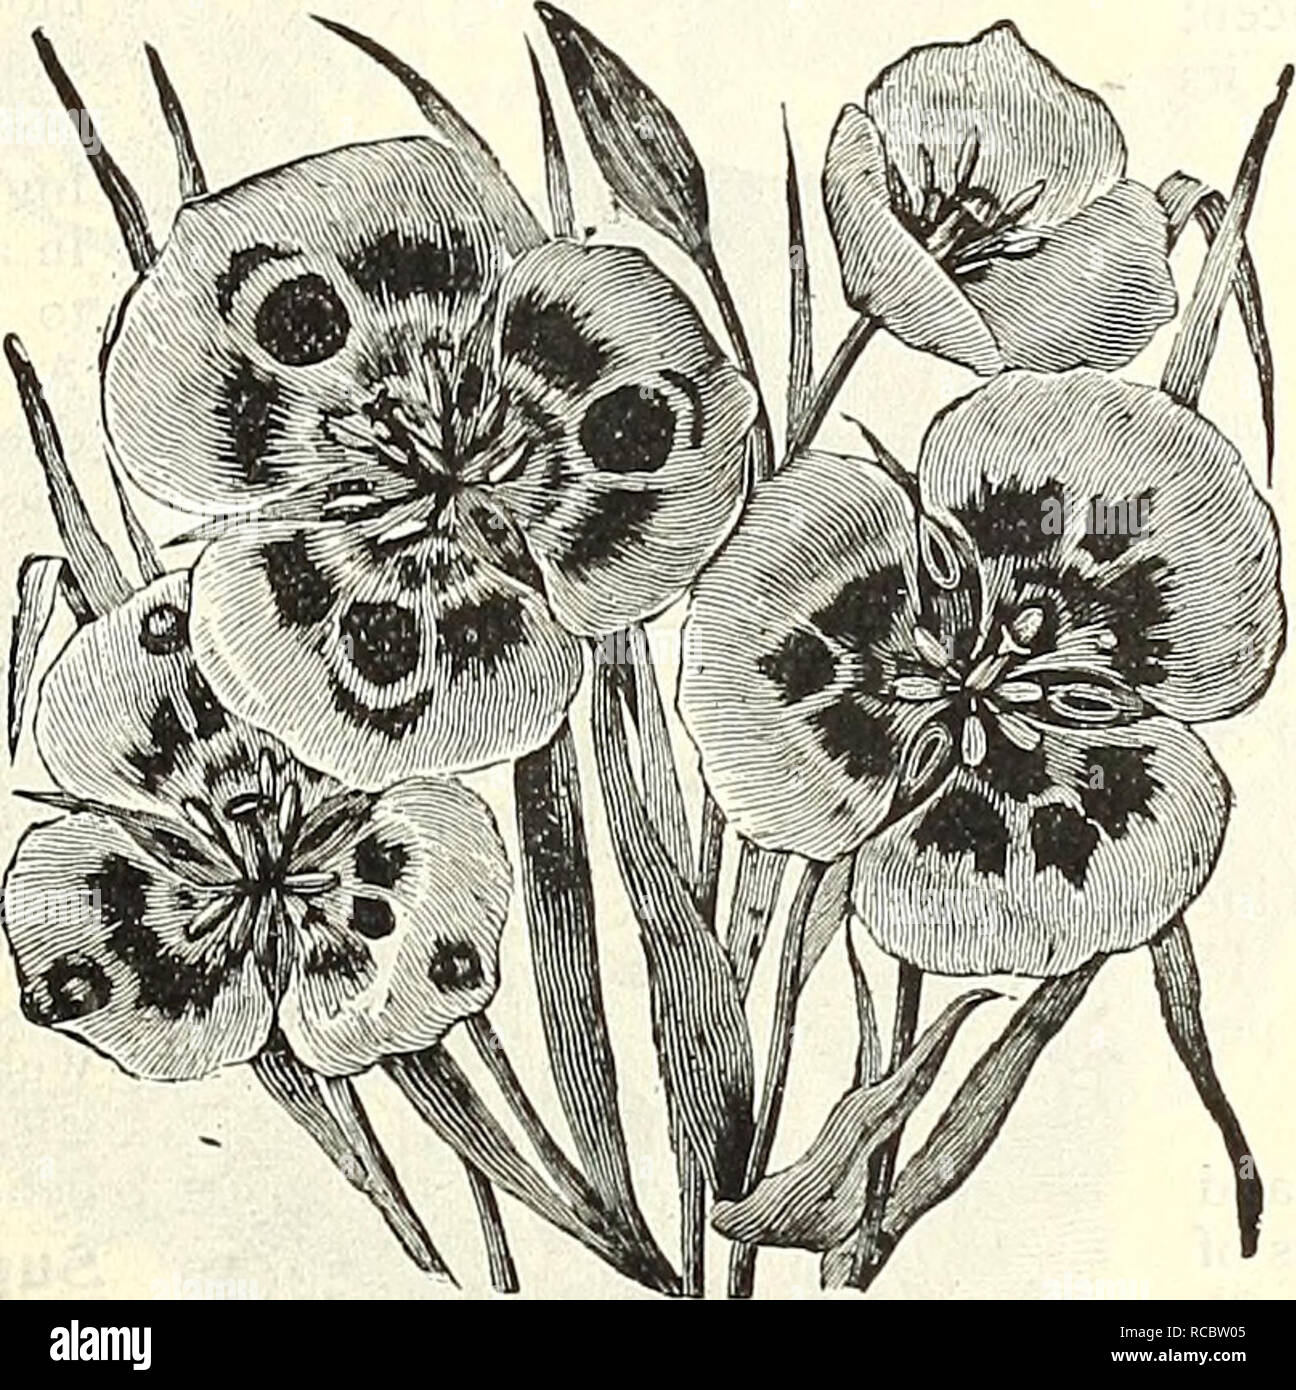 . Dreer's autumn 1902 catalogue. Bulbs (Plants) Catalogs; Flowers Seeds Catalogs; Gardening Equipment and supplies Catalogs; Nurseries (Horticulture) Catalogs; Fruit Seeds Catalogs. Double Anemones, ANEMONE FUEGENS. The Anemone Fulgens is one of the most attractive and desirable flowers for winter forcing or early spring bloom- ing. Its dazzling vermilion flowers are very pretty, and are borne in pro- fusion. 3 cts. each ; 30 cts. per doz.; $2.00 per 100. Anemones free by mail at dozen rates; 15 cts. additional per 100. BABIANA. A charming genus with leaves of darkest green, thickly covered wi Stock Photo